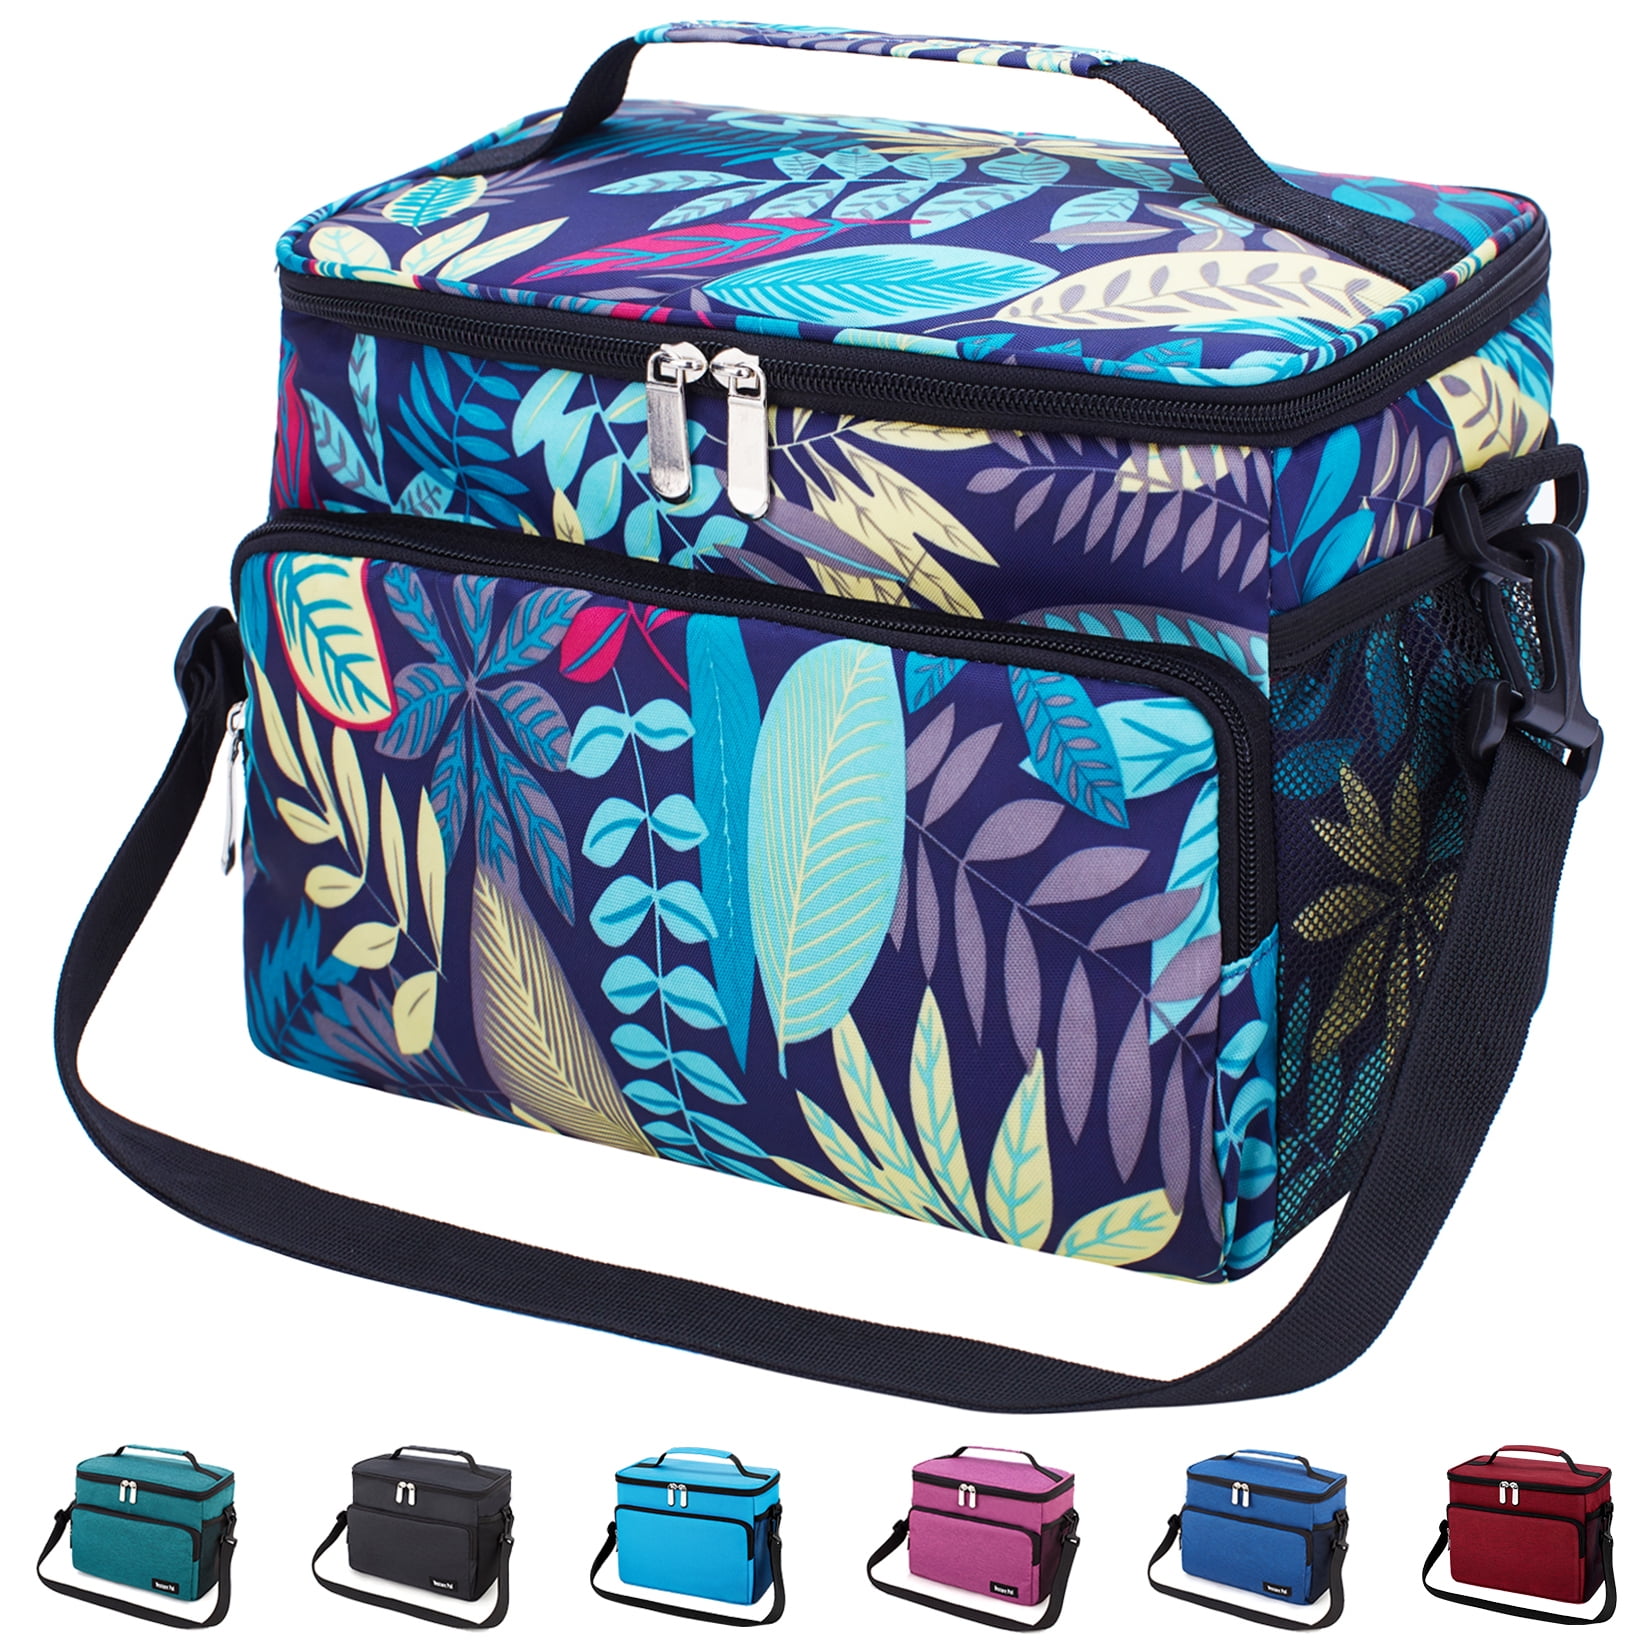 ExtraCharm Insulated Lunch Bag for Women/Men - Reusable Lunch Box for  Office Picnic Hiking Beach - L…See more ExtraCharm Insulated Lunch Bag for